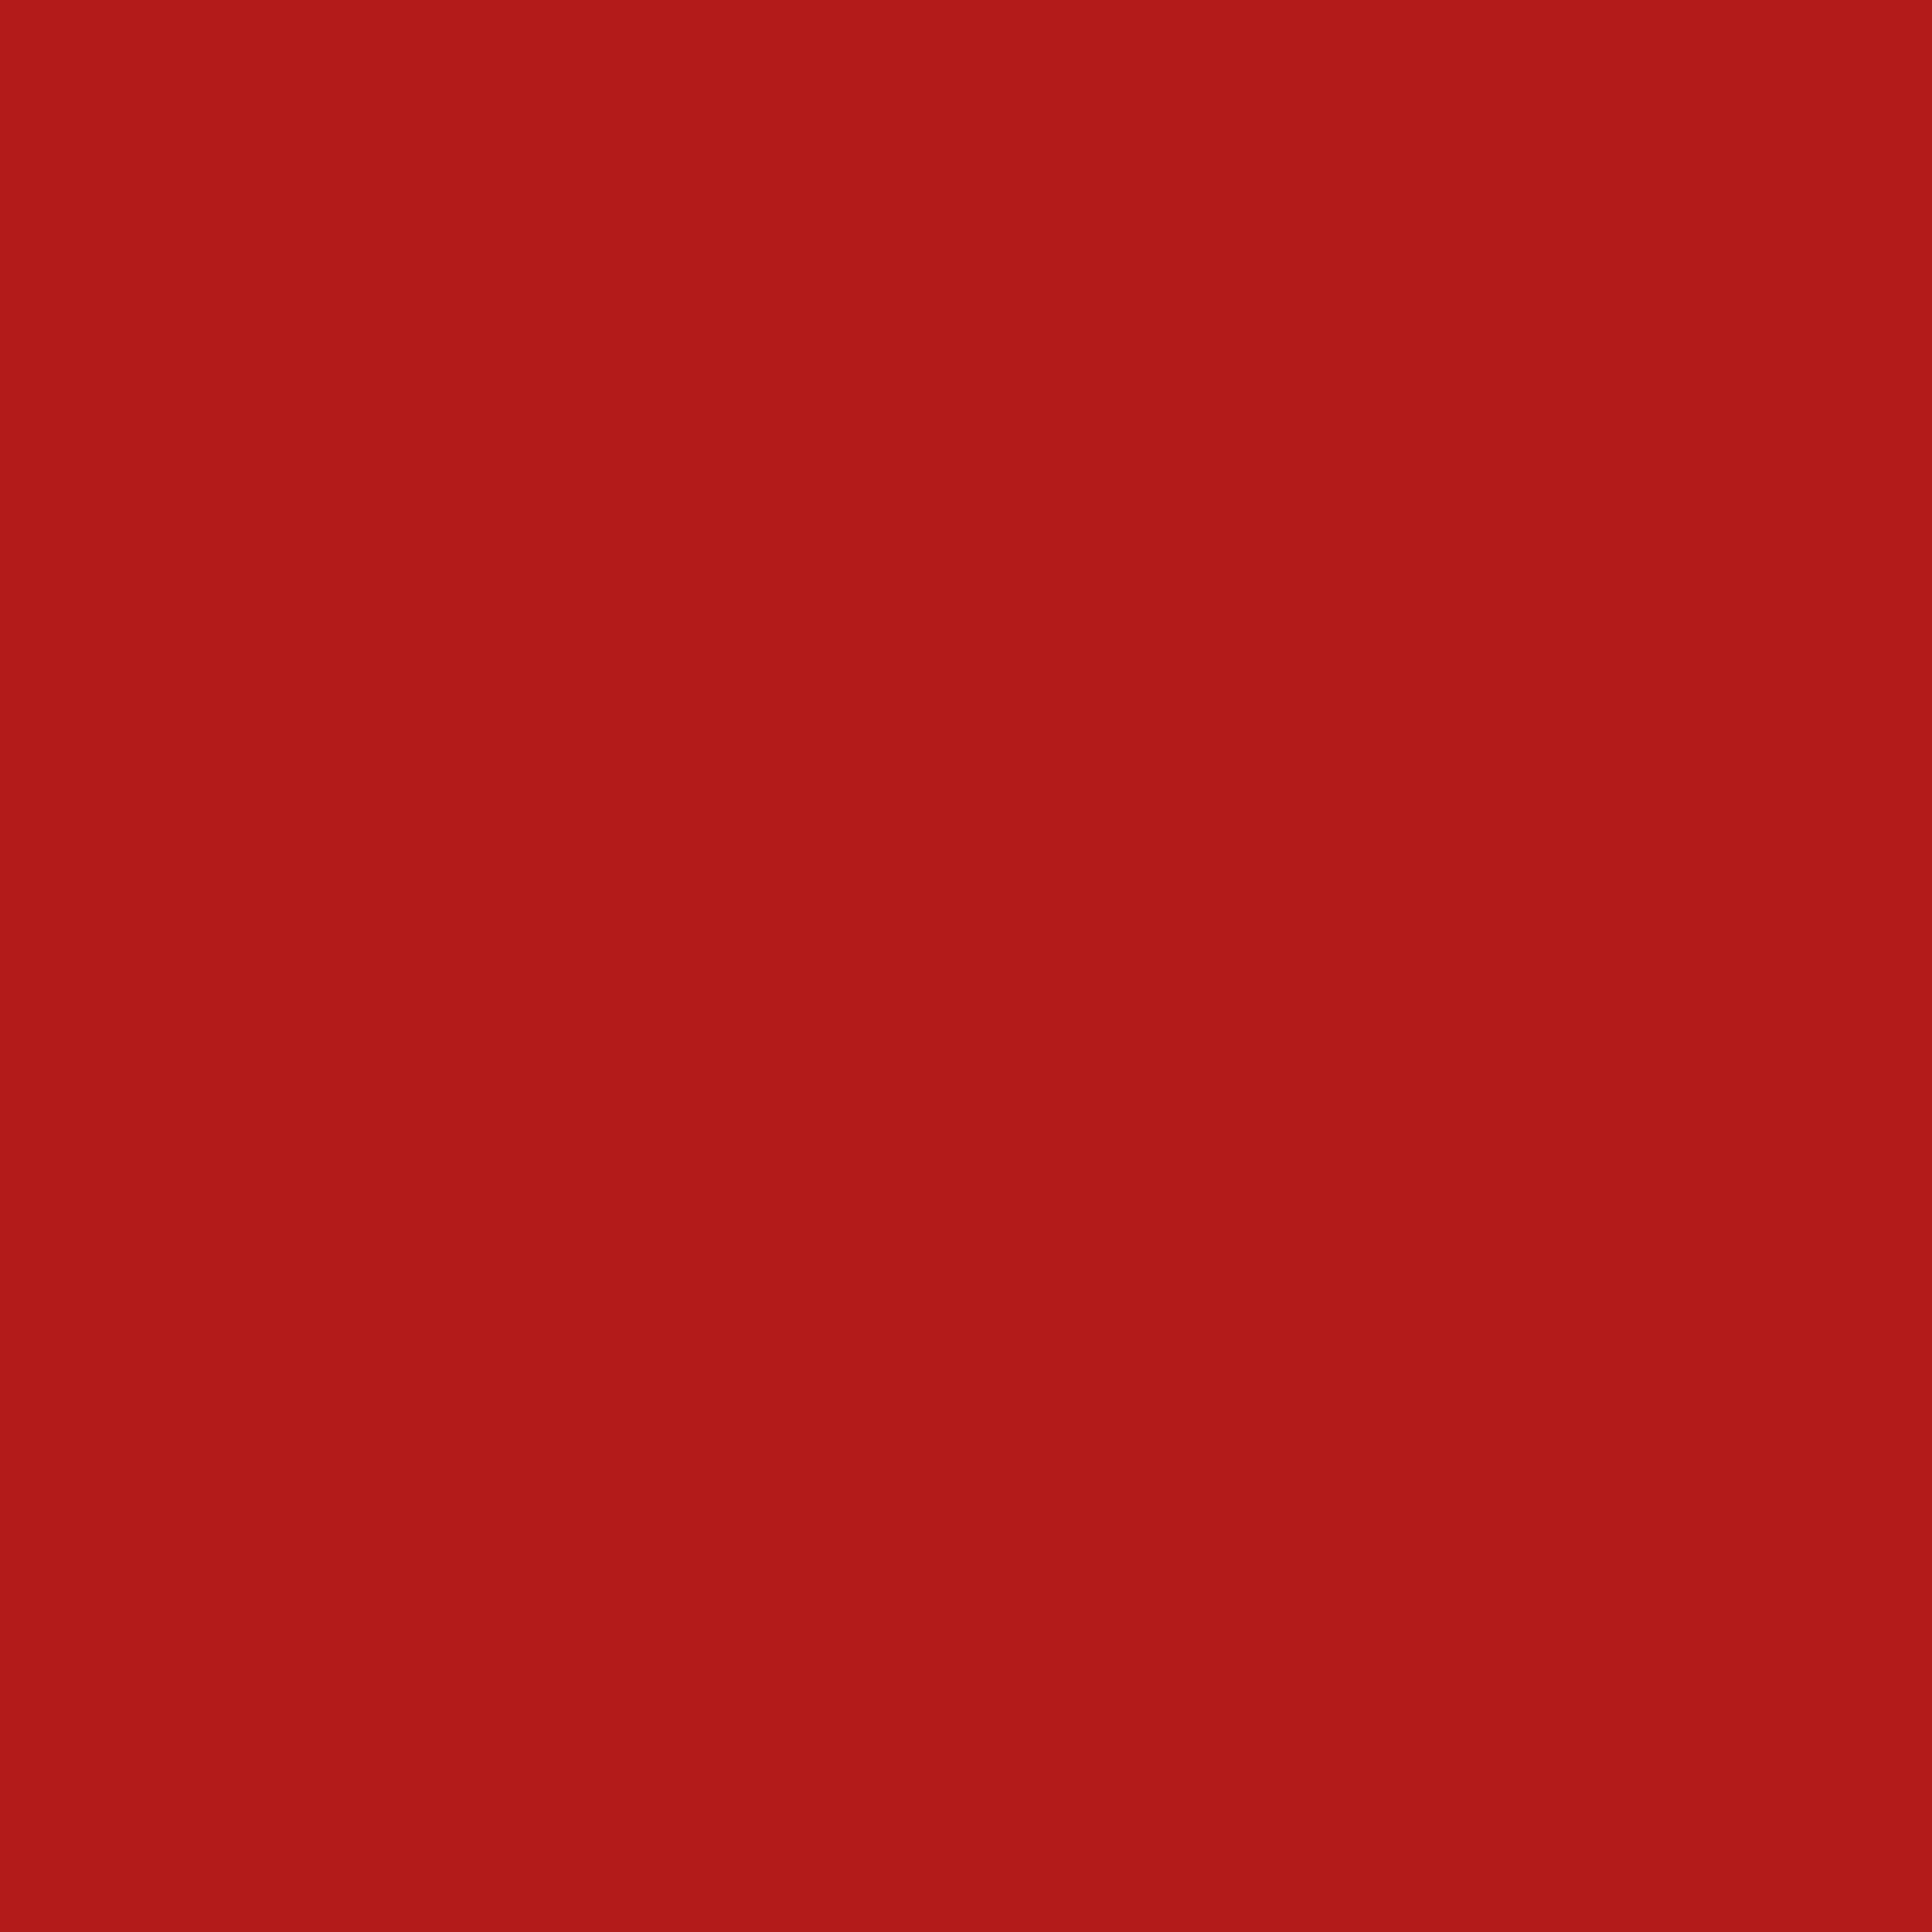 2732x2732 Cornell Red Solid Color Background